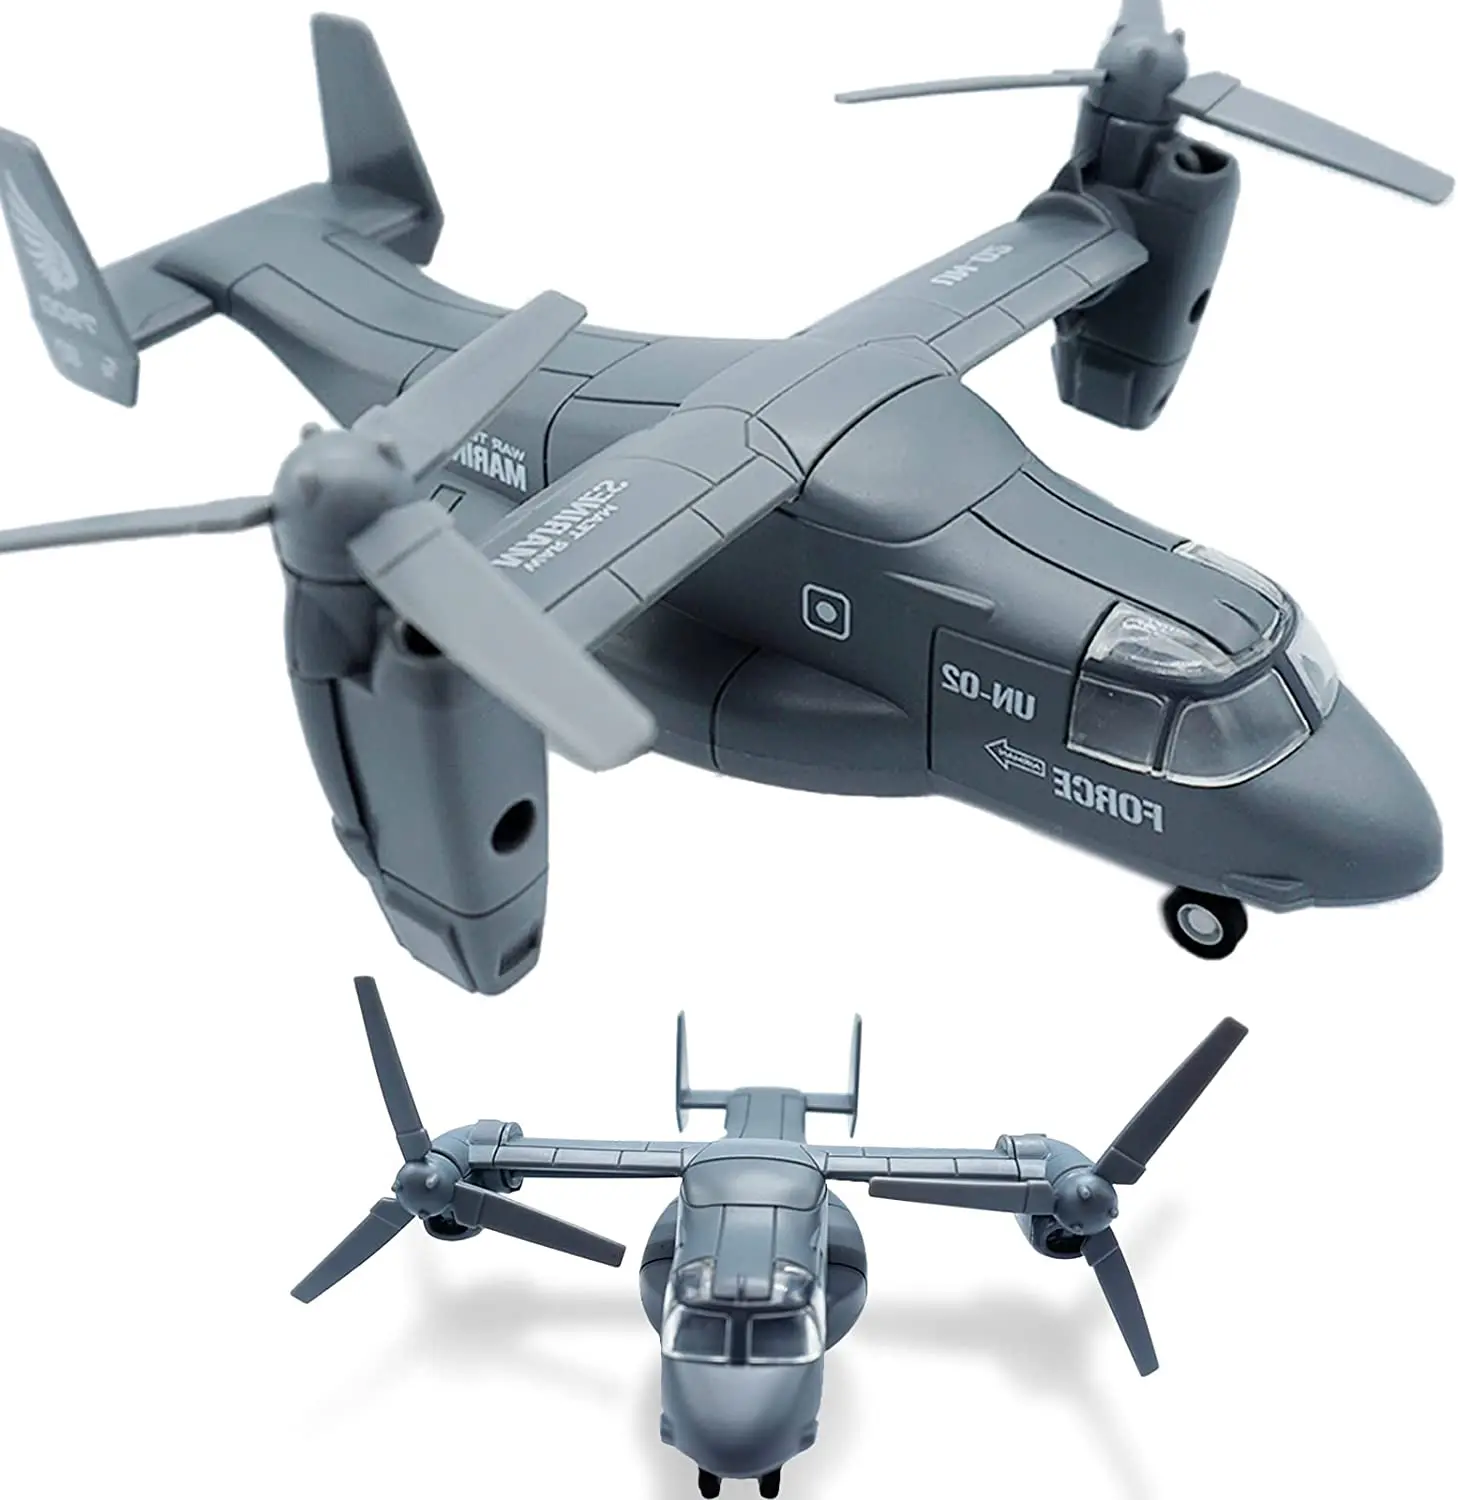 

Military Helicopter Toy Marines Force Plane Model Military Transport Aircraft Fighter Jet DieCast Pull Back Airplanes with Light